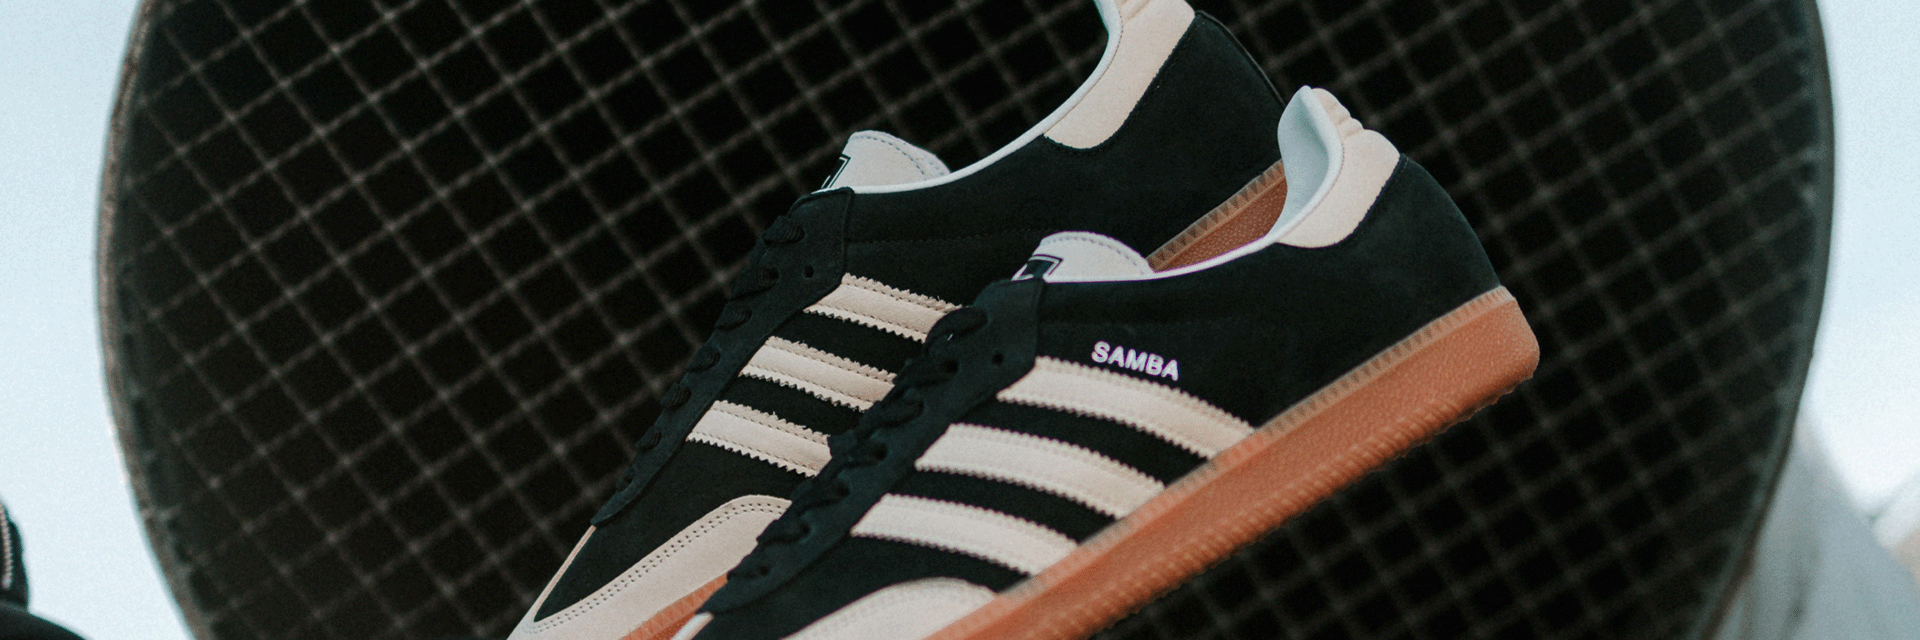 adidas Samba - you can find the popular all-rounder here!